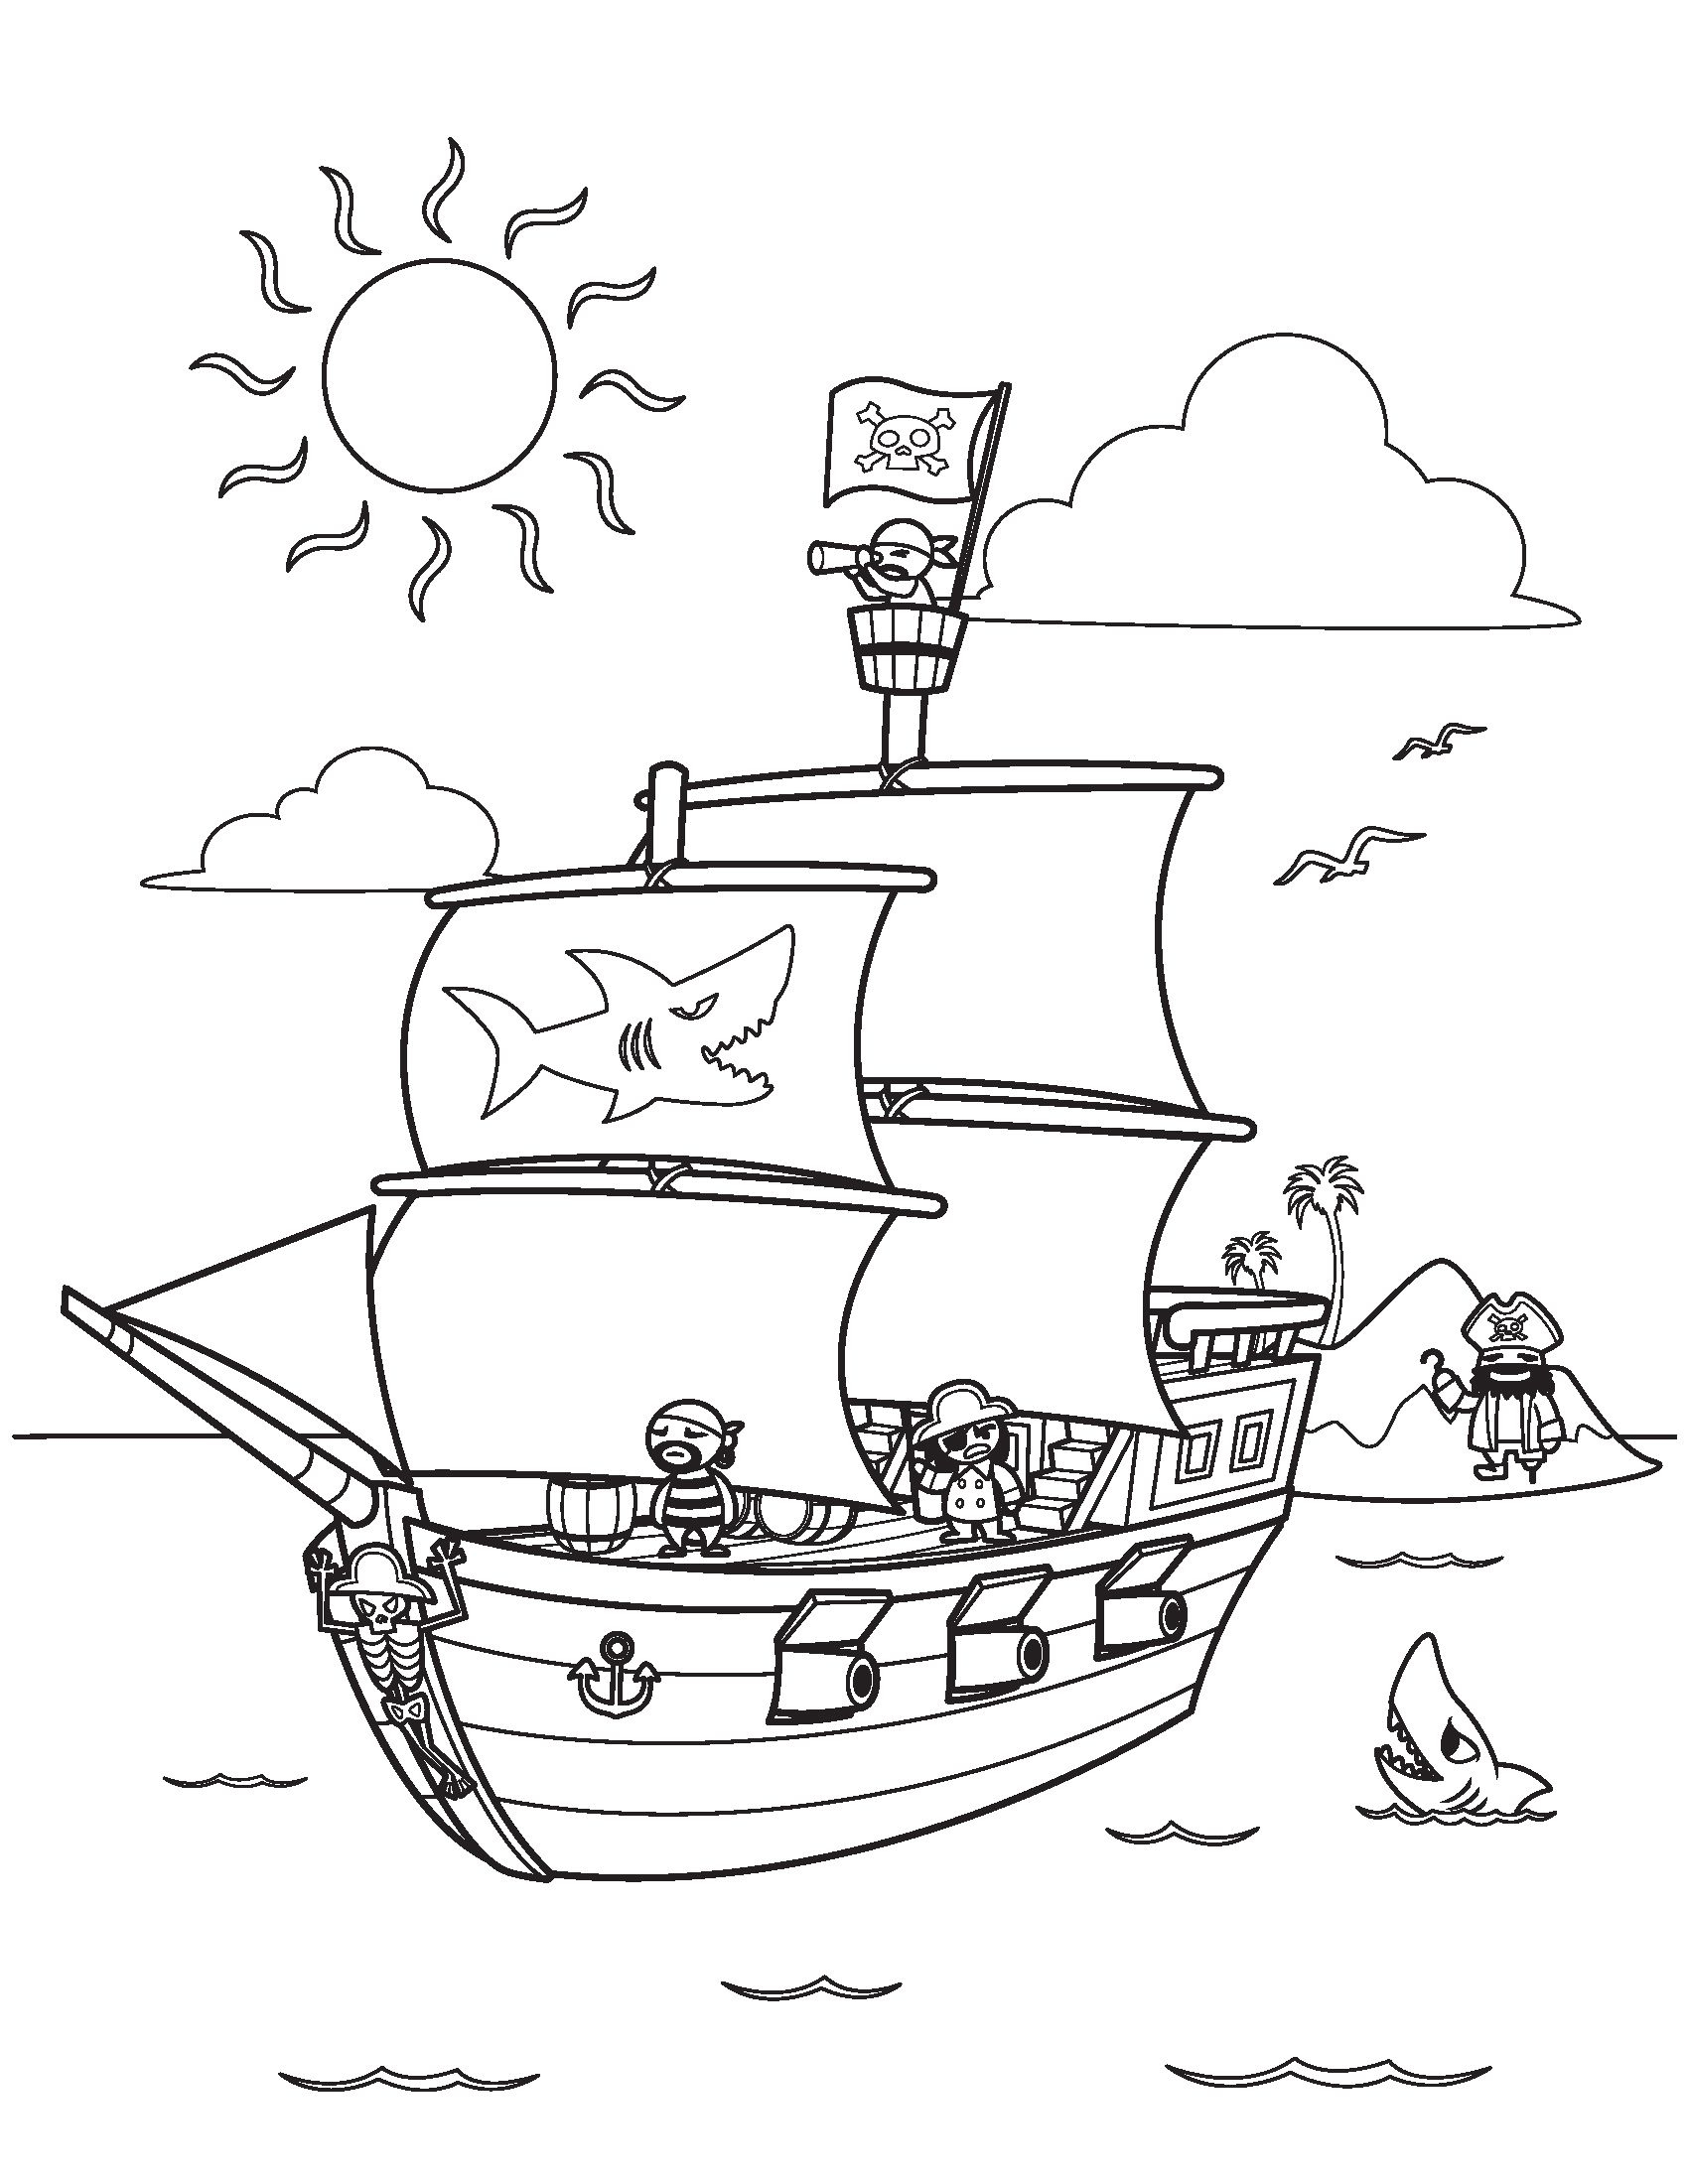 Pirate Ship Coloring Pages Kidsfreecoloring | Free Download Kids - Free Printable Boat Pictures